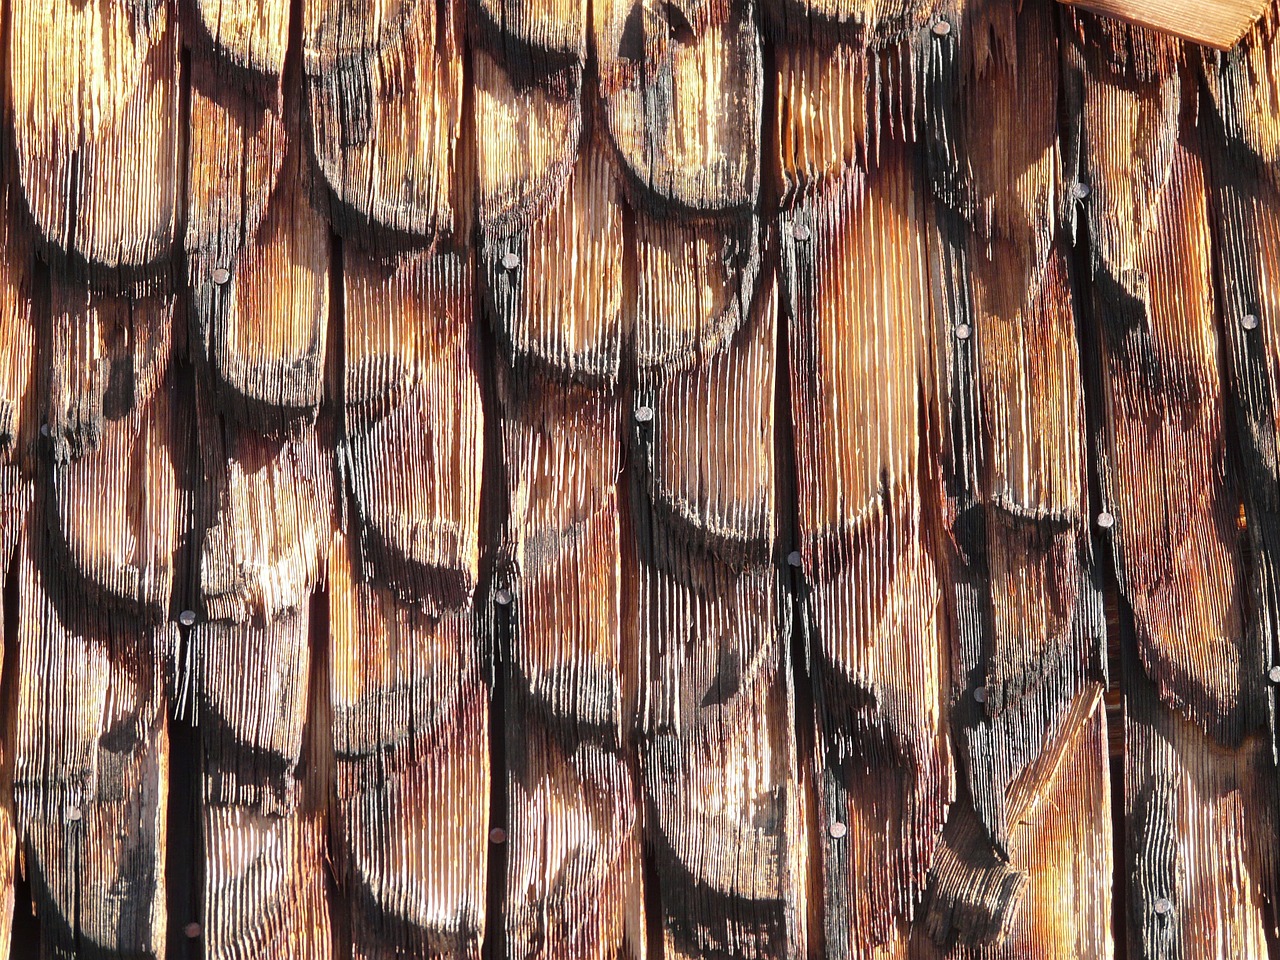 shingle,wood,roofing,facade cladding,wood shingle,grain,building,wall,panel,architecture,free pictures, free photos, free images, royalty free, free illustrations, public domain